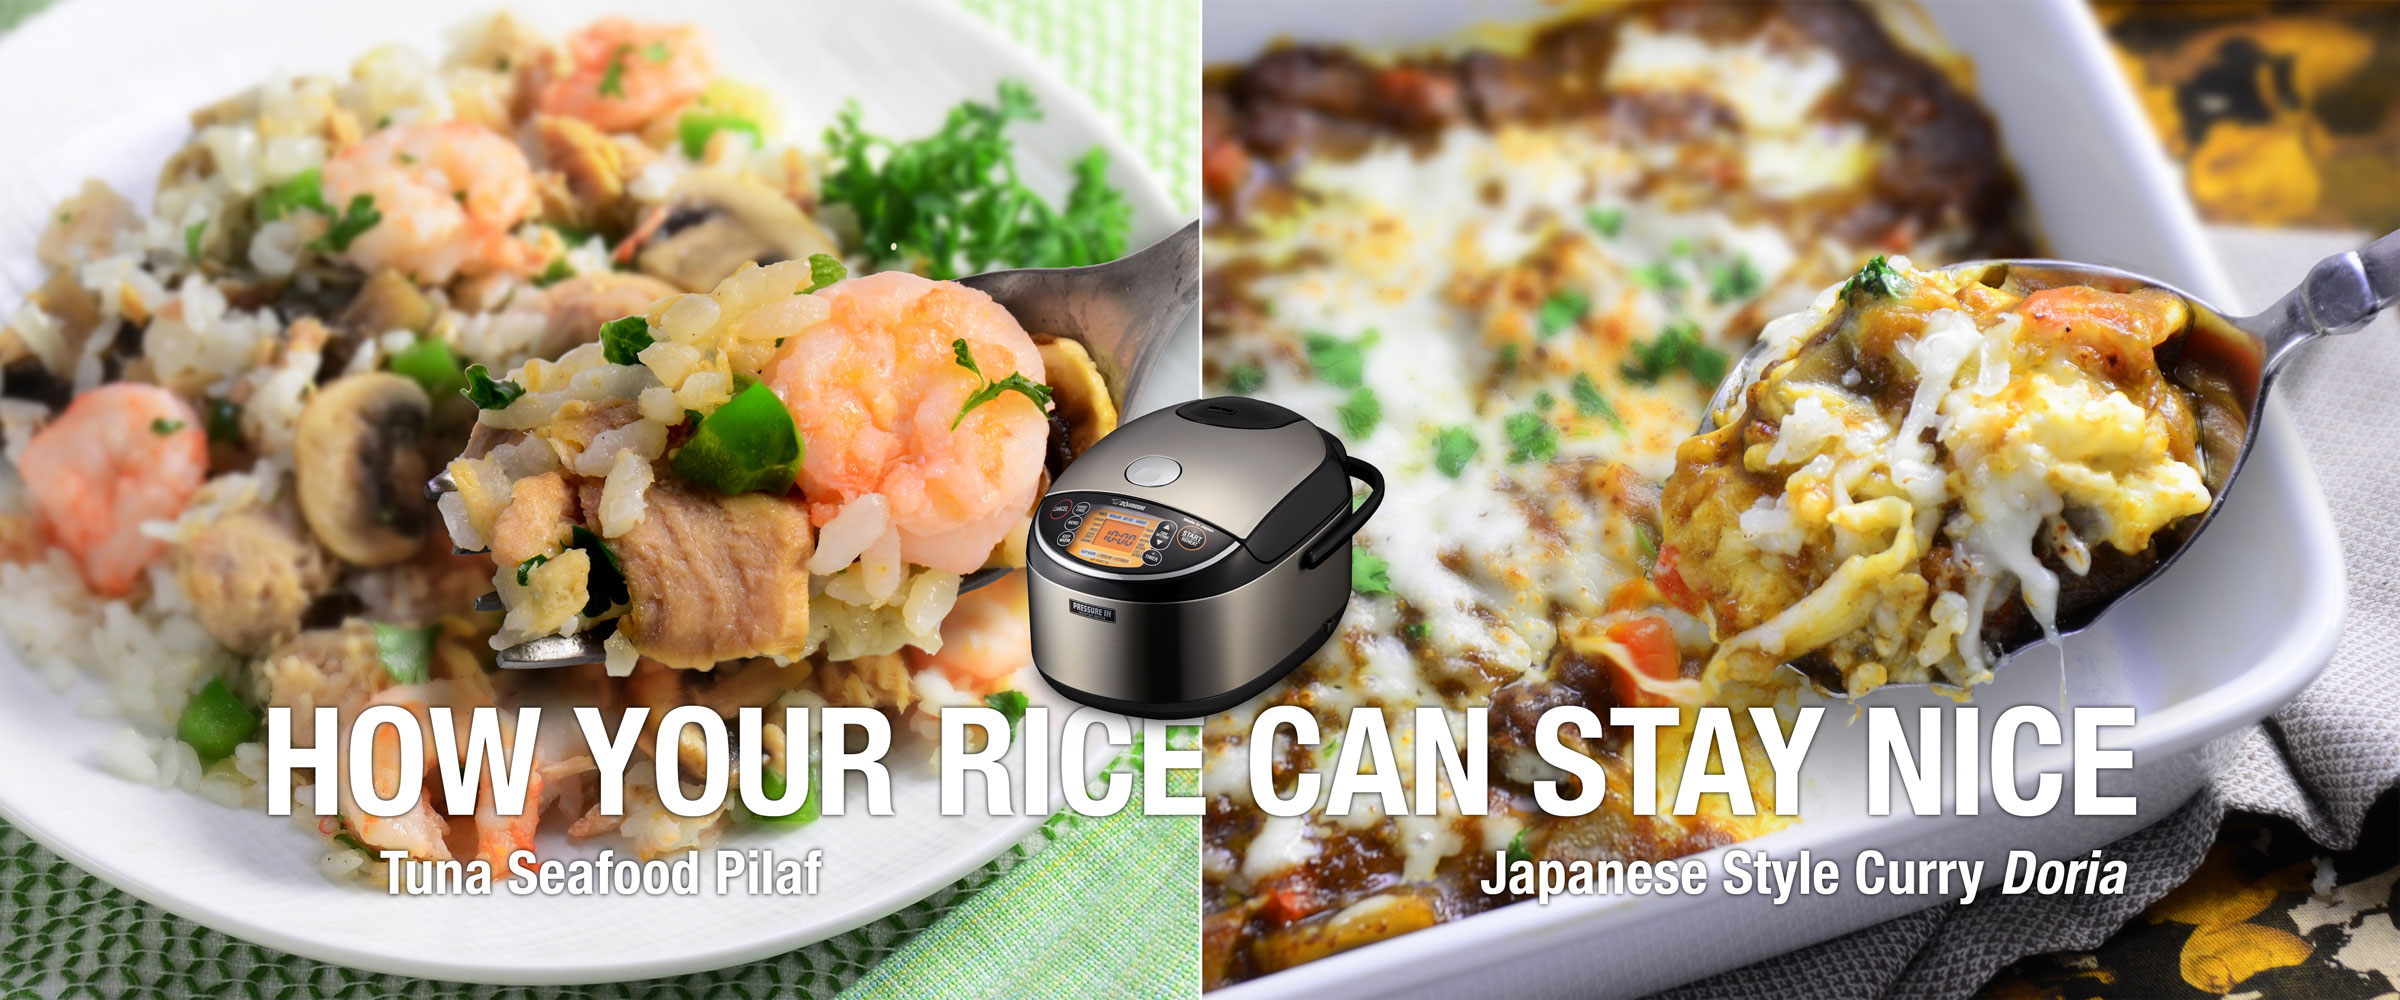 HOW YOUR RICE CAN STAY NICE